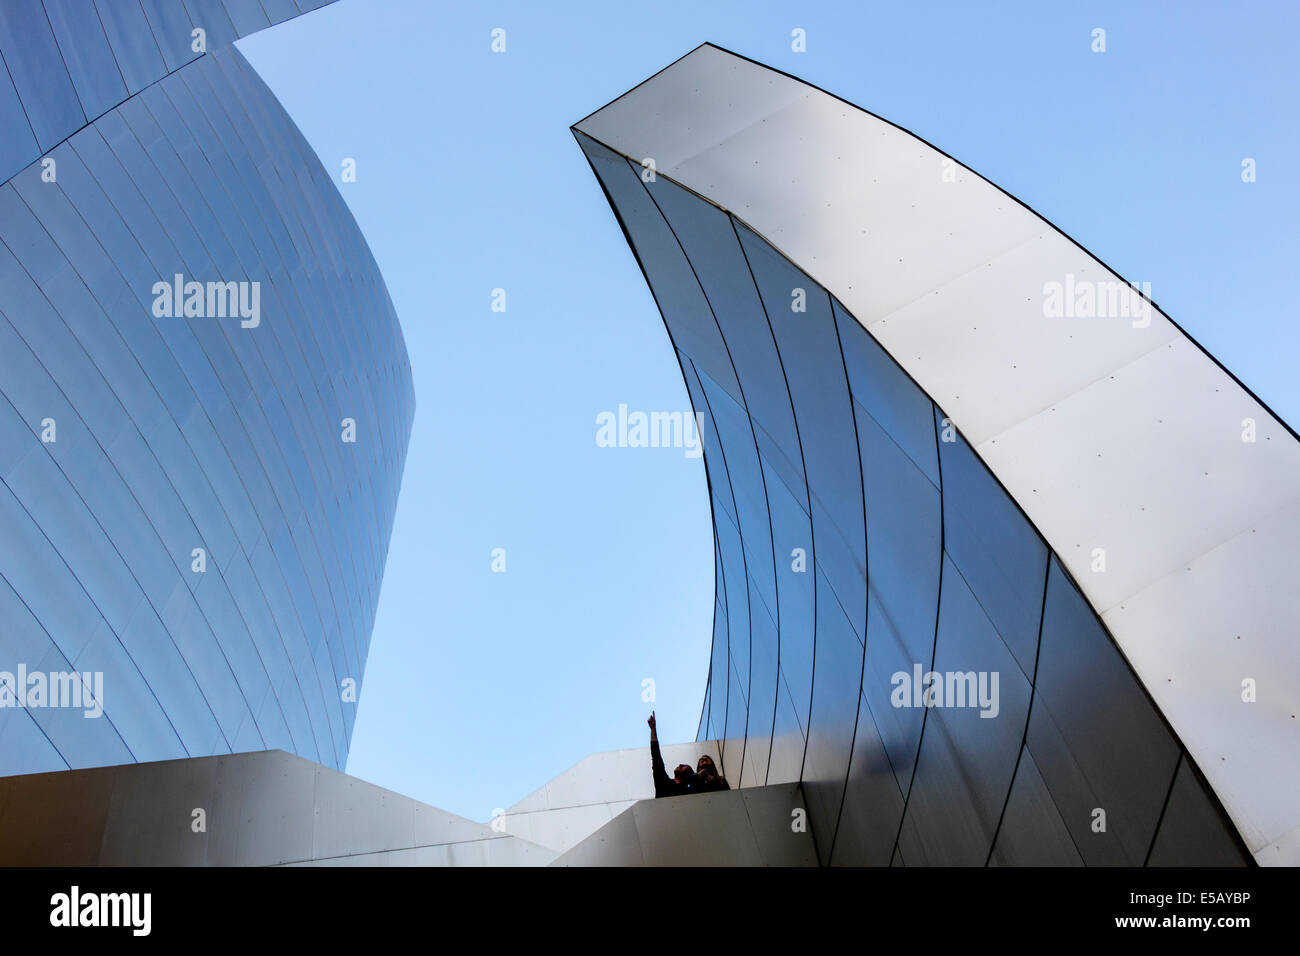 Los Angeles California,Downtown,Walt Disney Concert Hall performance venue,exterior,architecture,architectural,design,Frank Gehry,curve,stainless stee Stock Photo